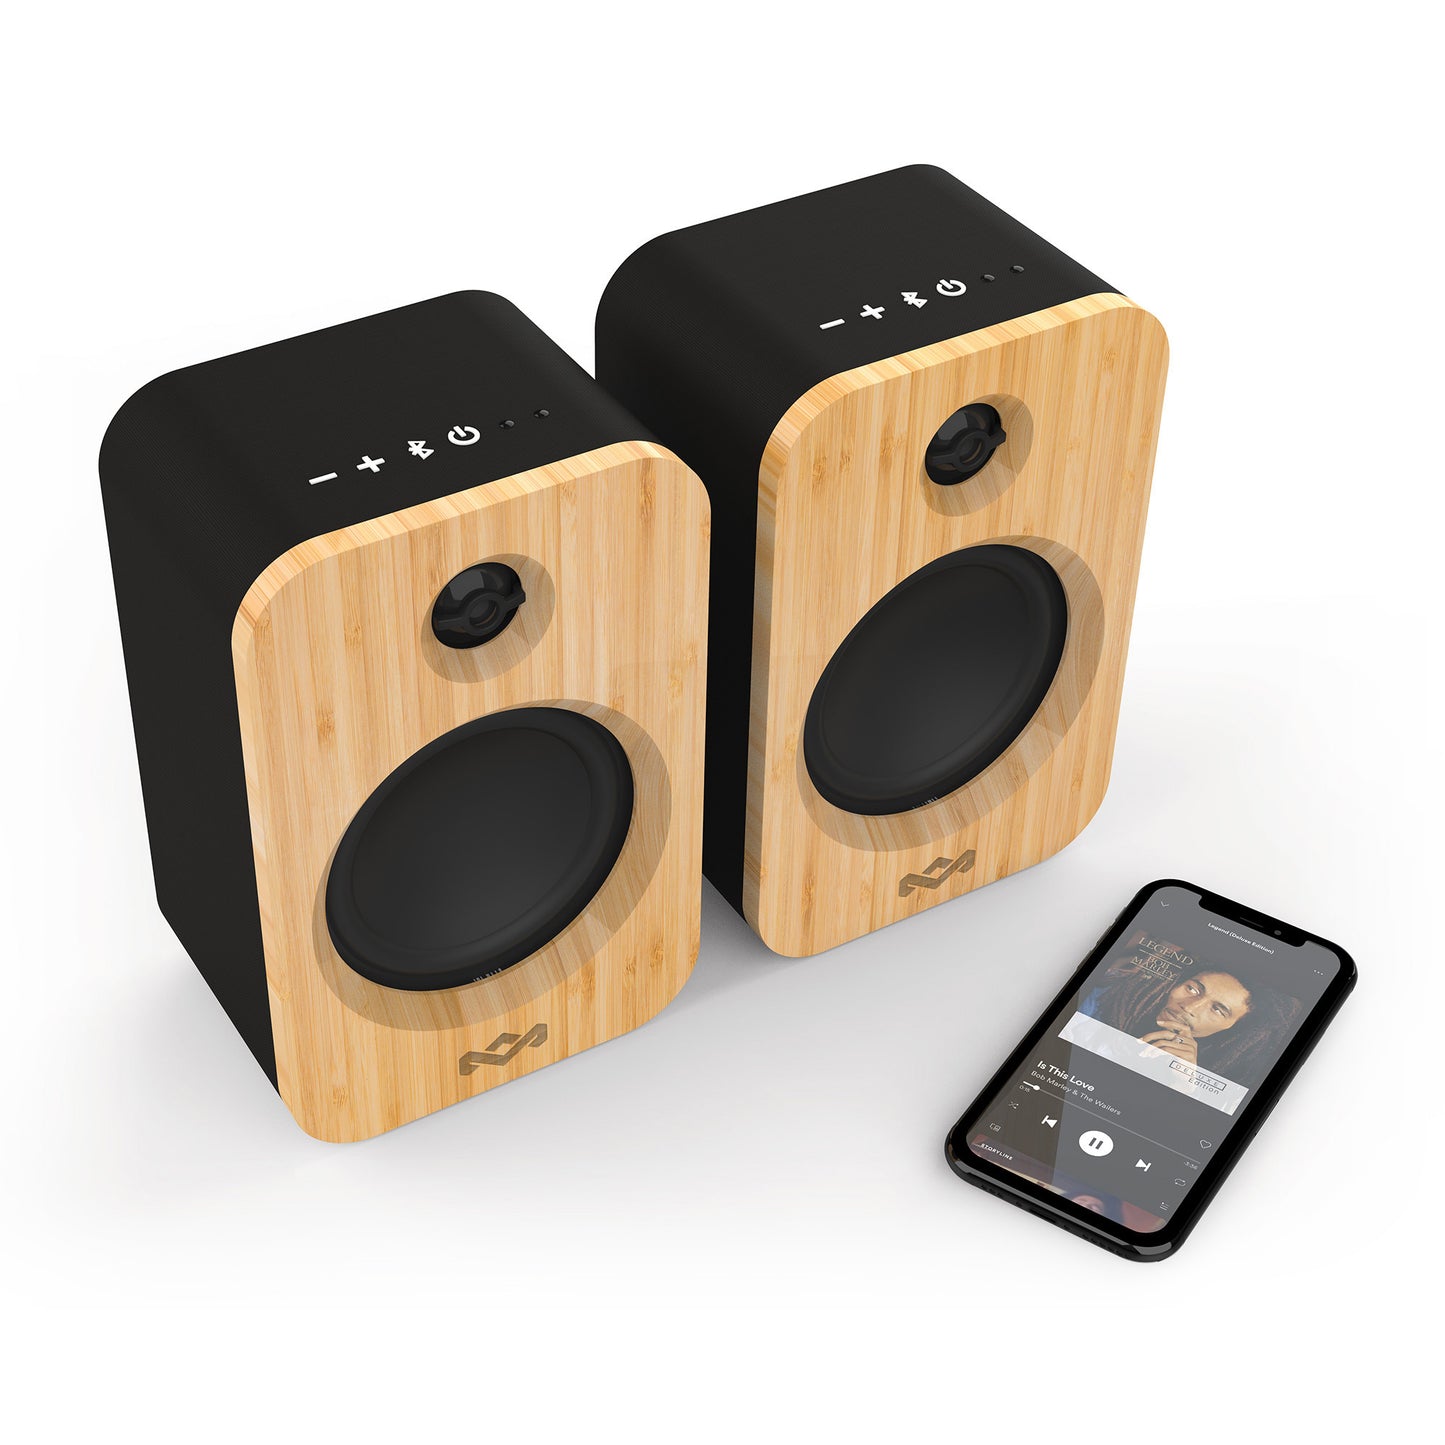 House of Marley Get Together Duo BT Speakers - 15-08636